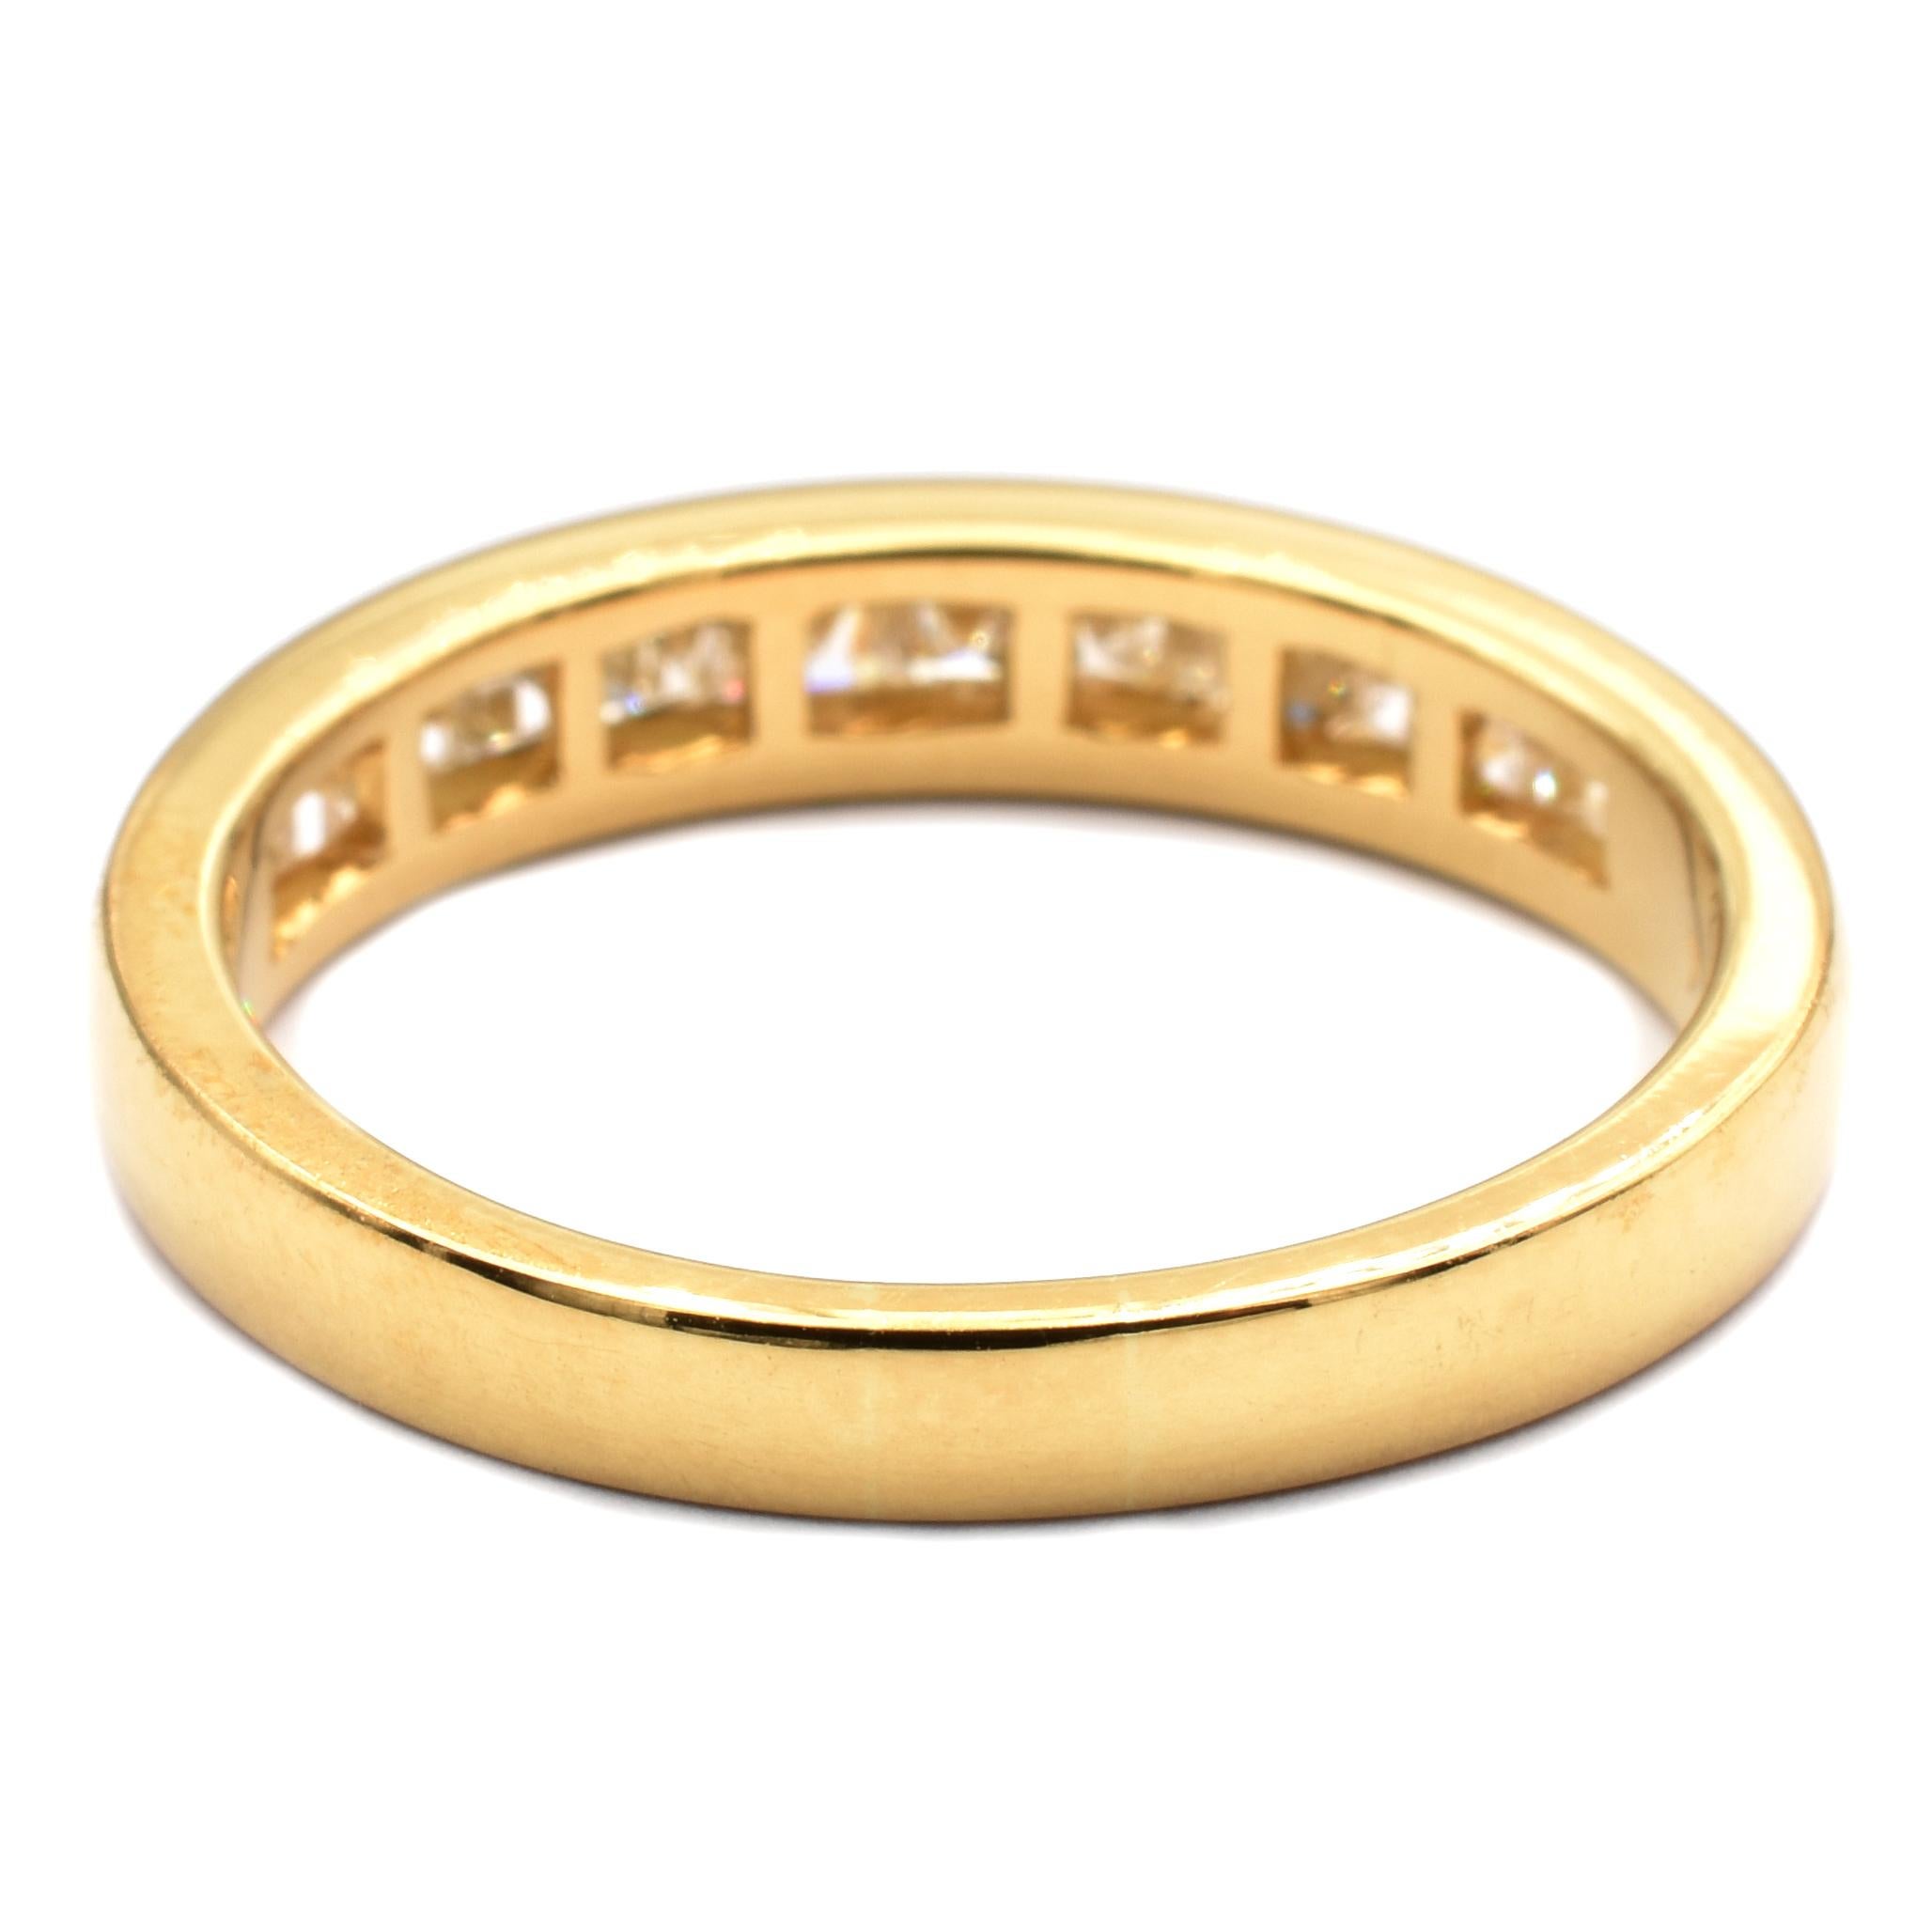 Gilberto Cassola Square Cut Diamonds Yellow Gold Ring Made in Italy For Sale 2